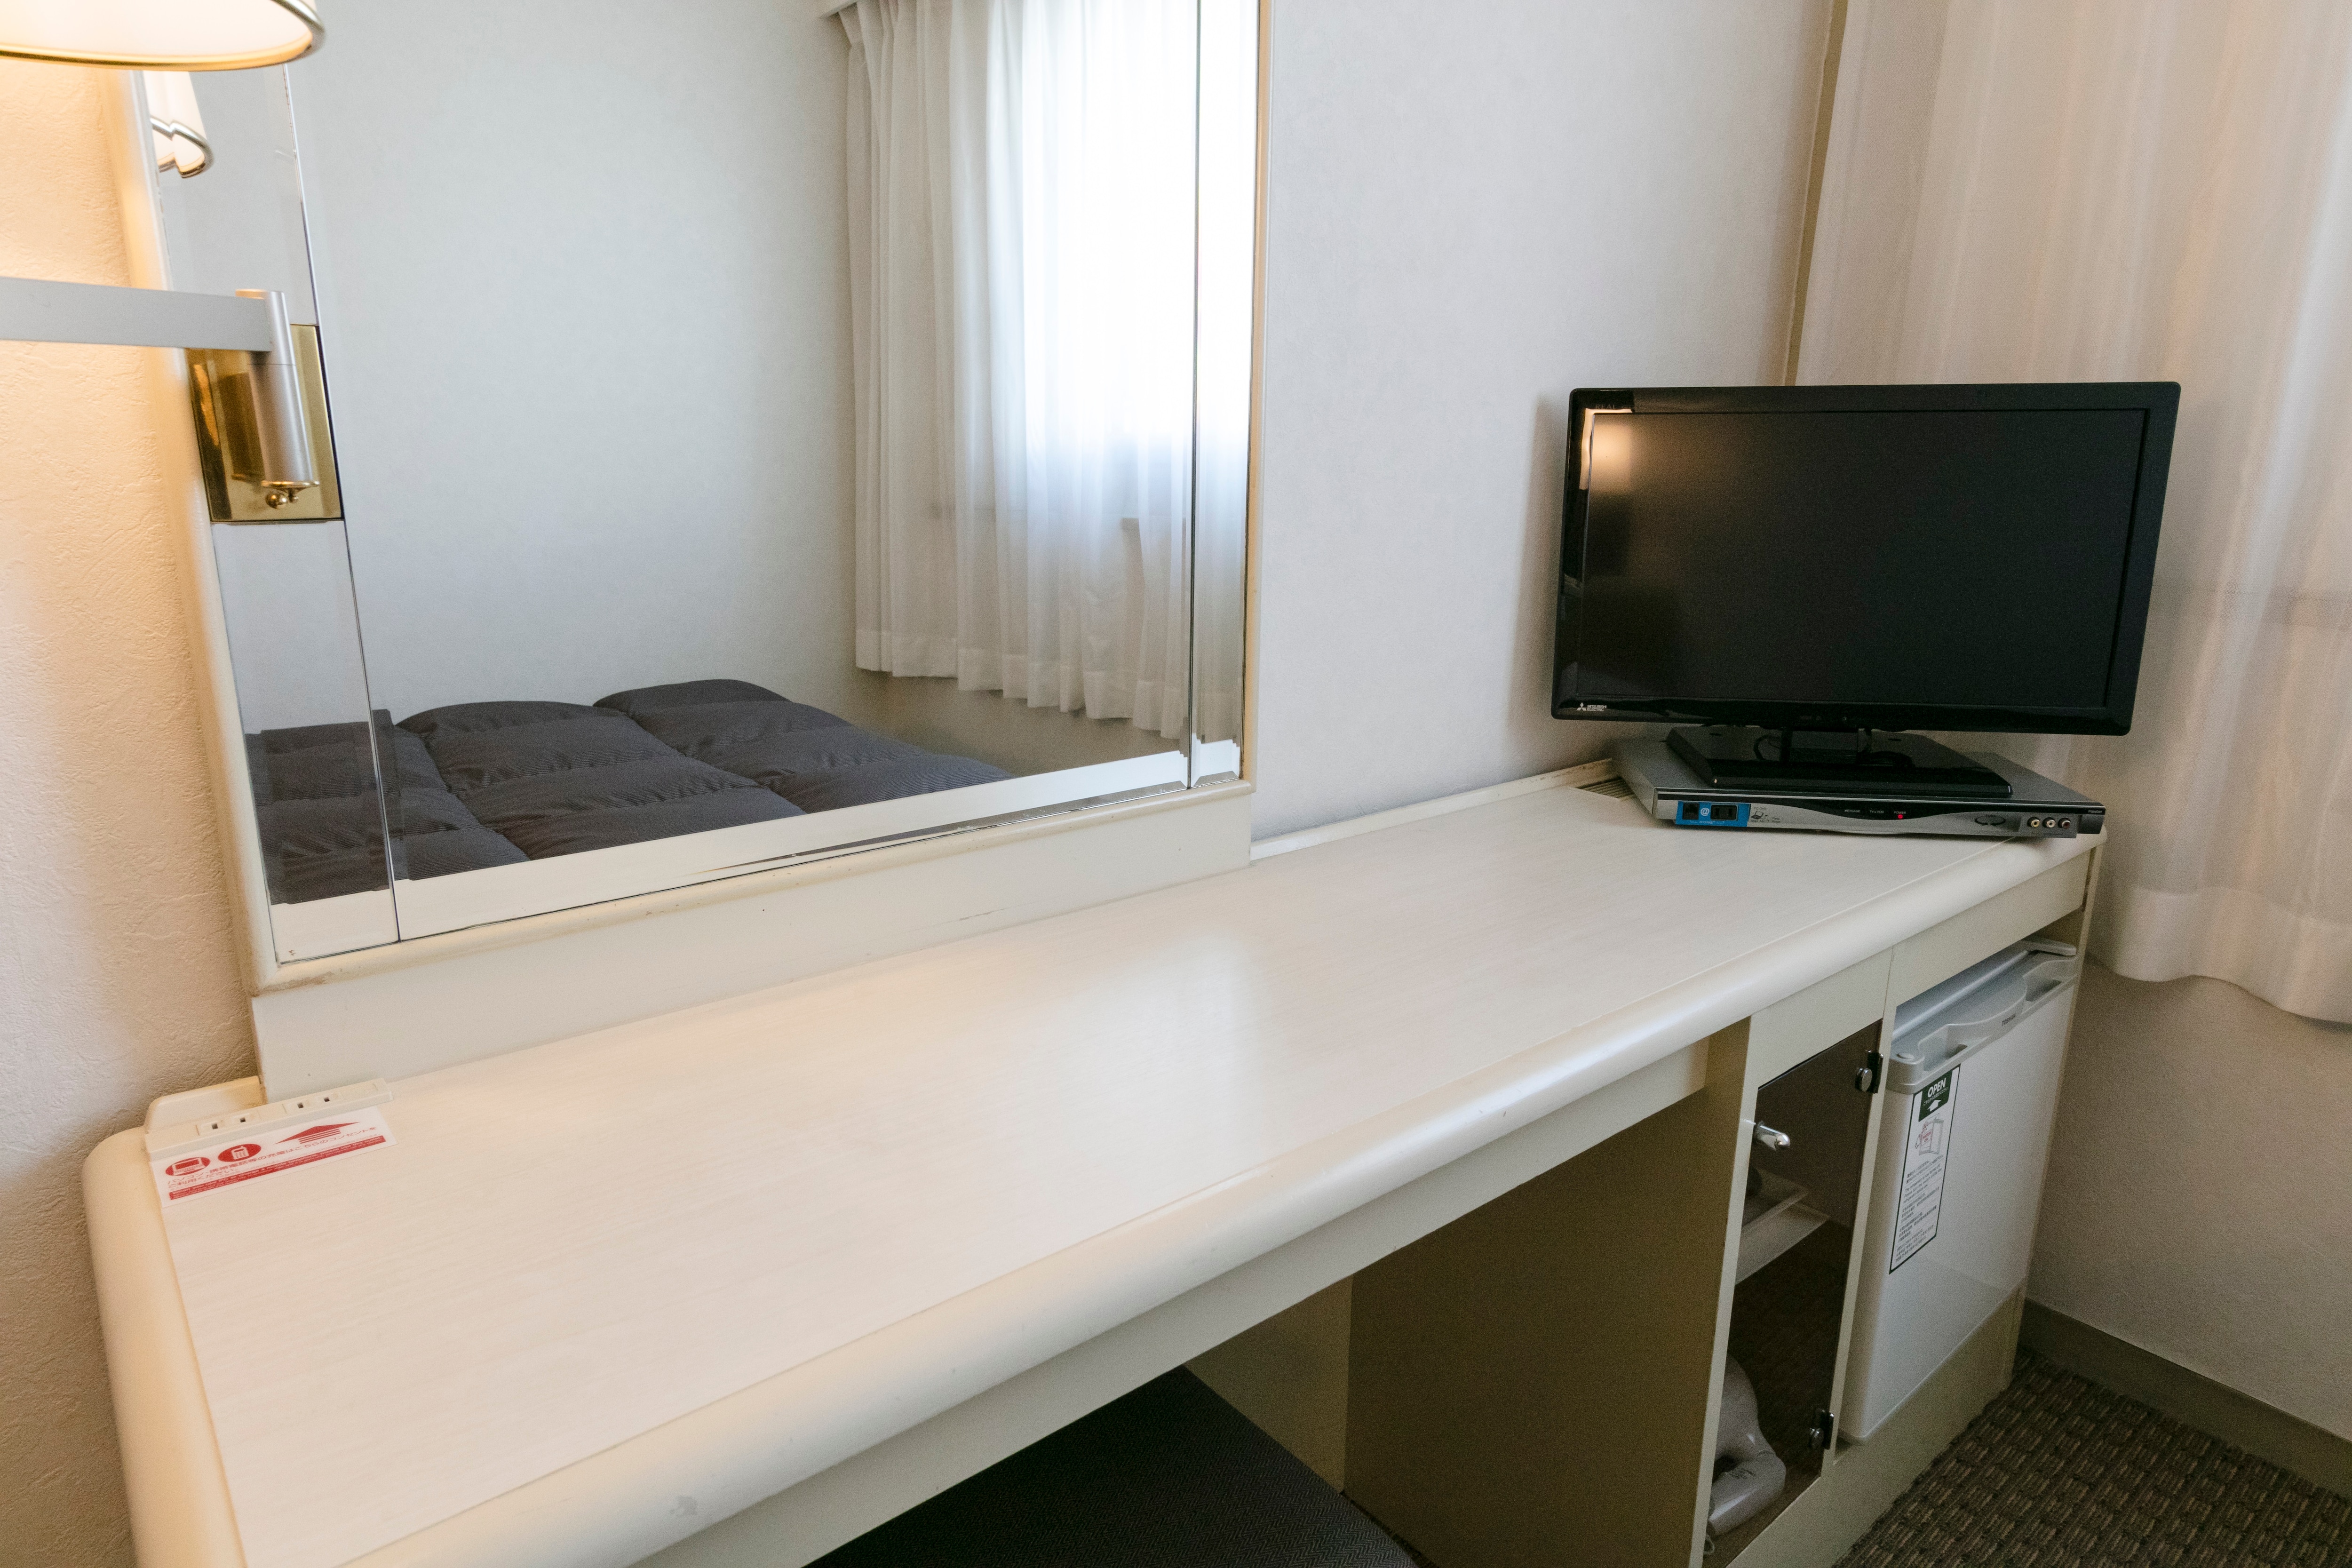 Single room ◇ 13.5㎡ ◇ [Double bed: 140cm wide]